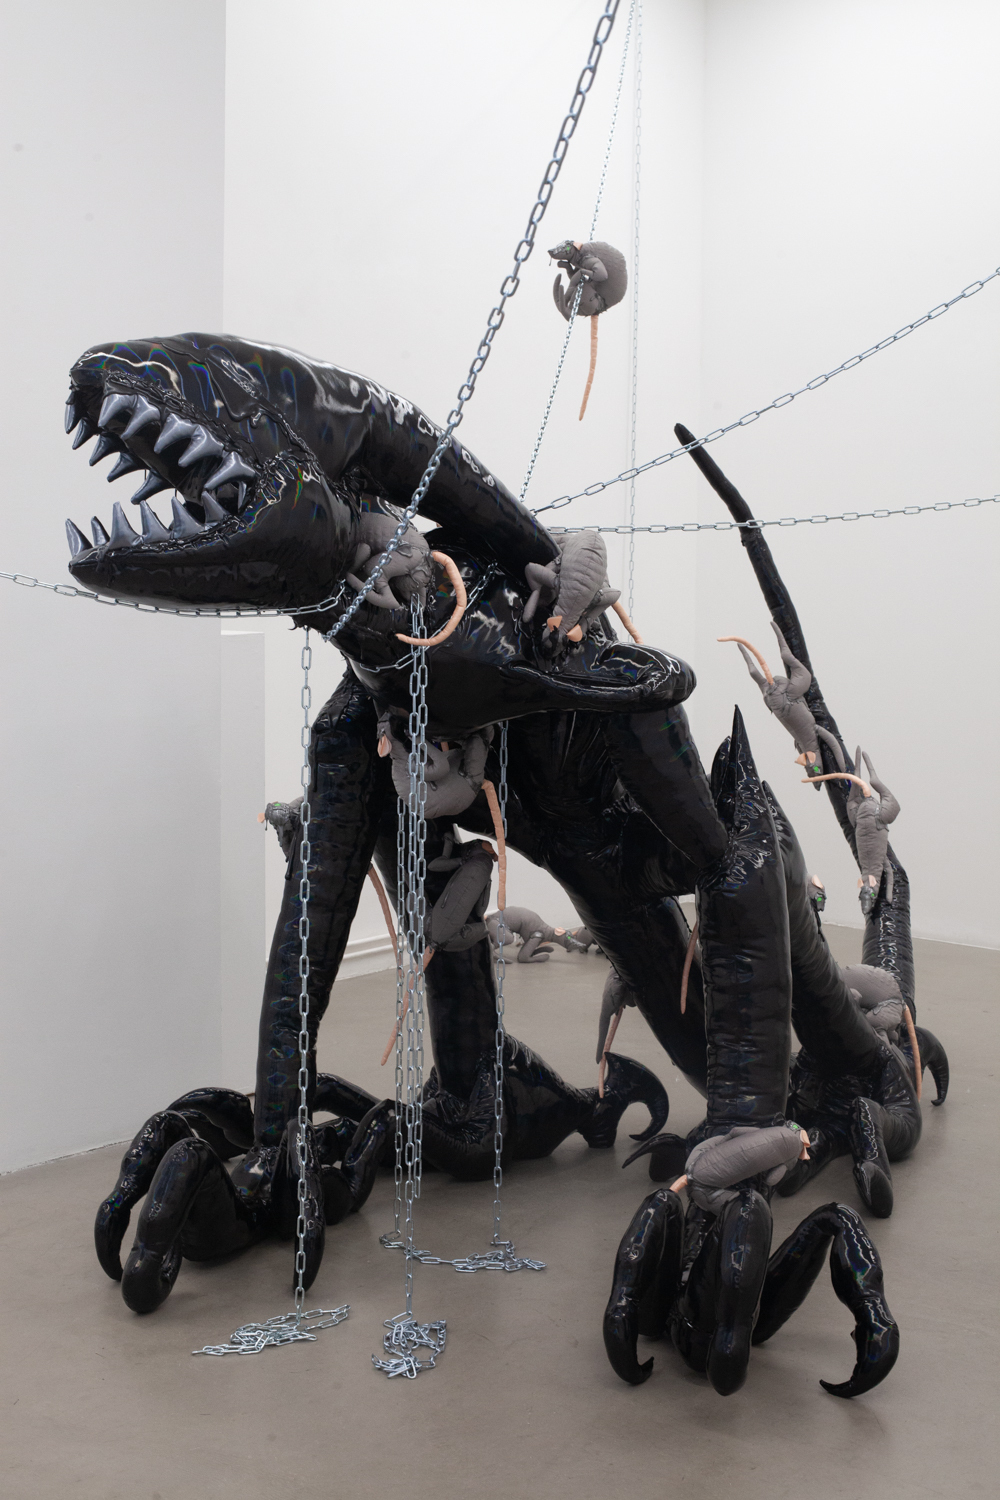 Mary-Audrey Ramirez, an army of rats is still an army, 2020/2021, mixed media, dimensions variable